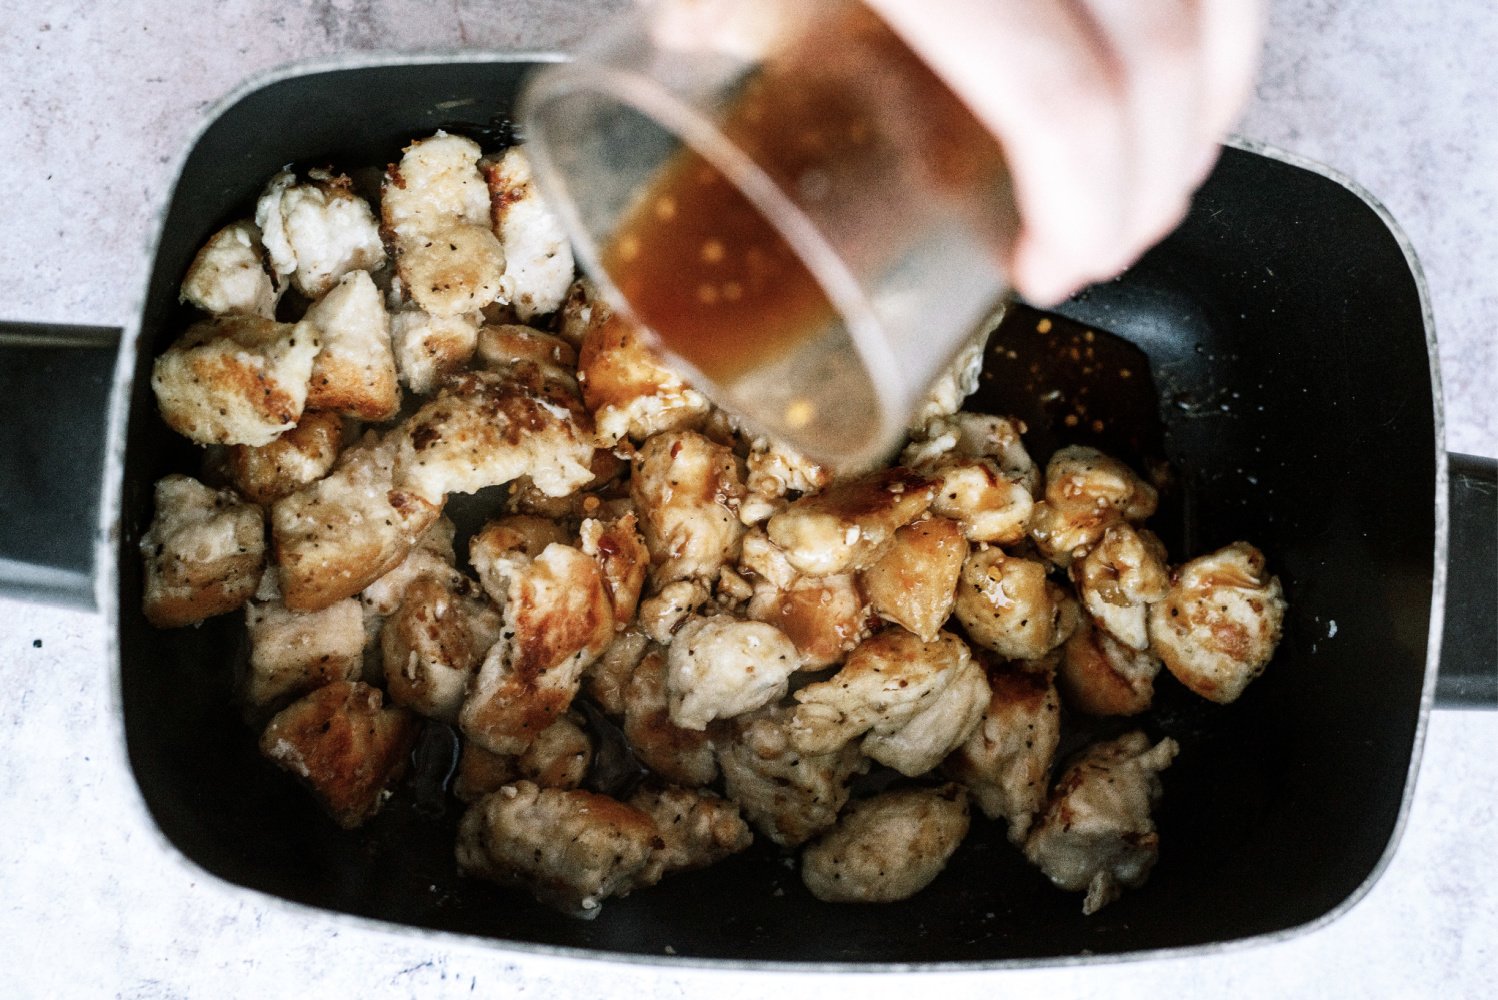 pouring sauce over browned chicken in slow cooker